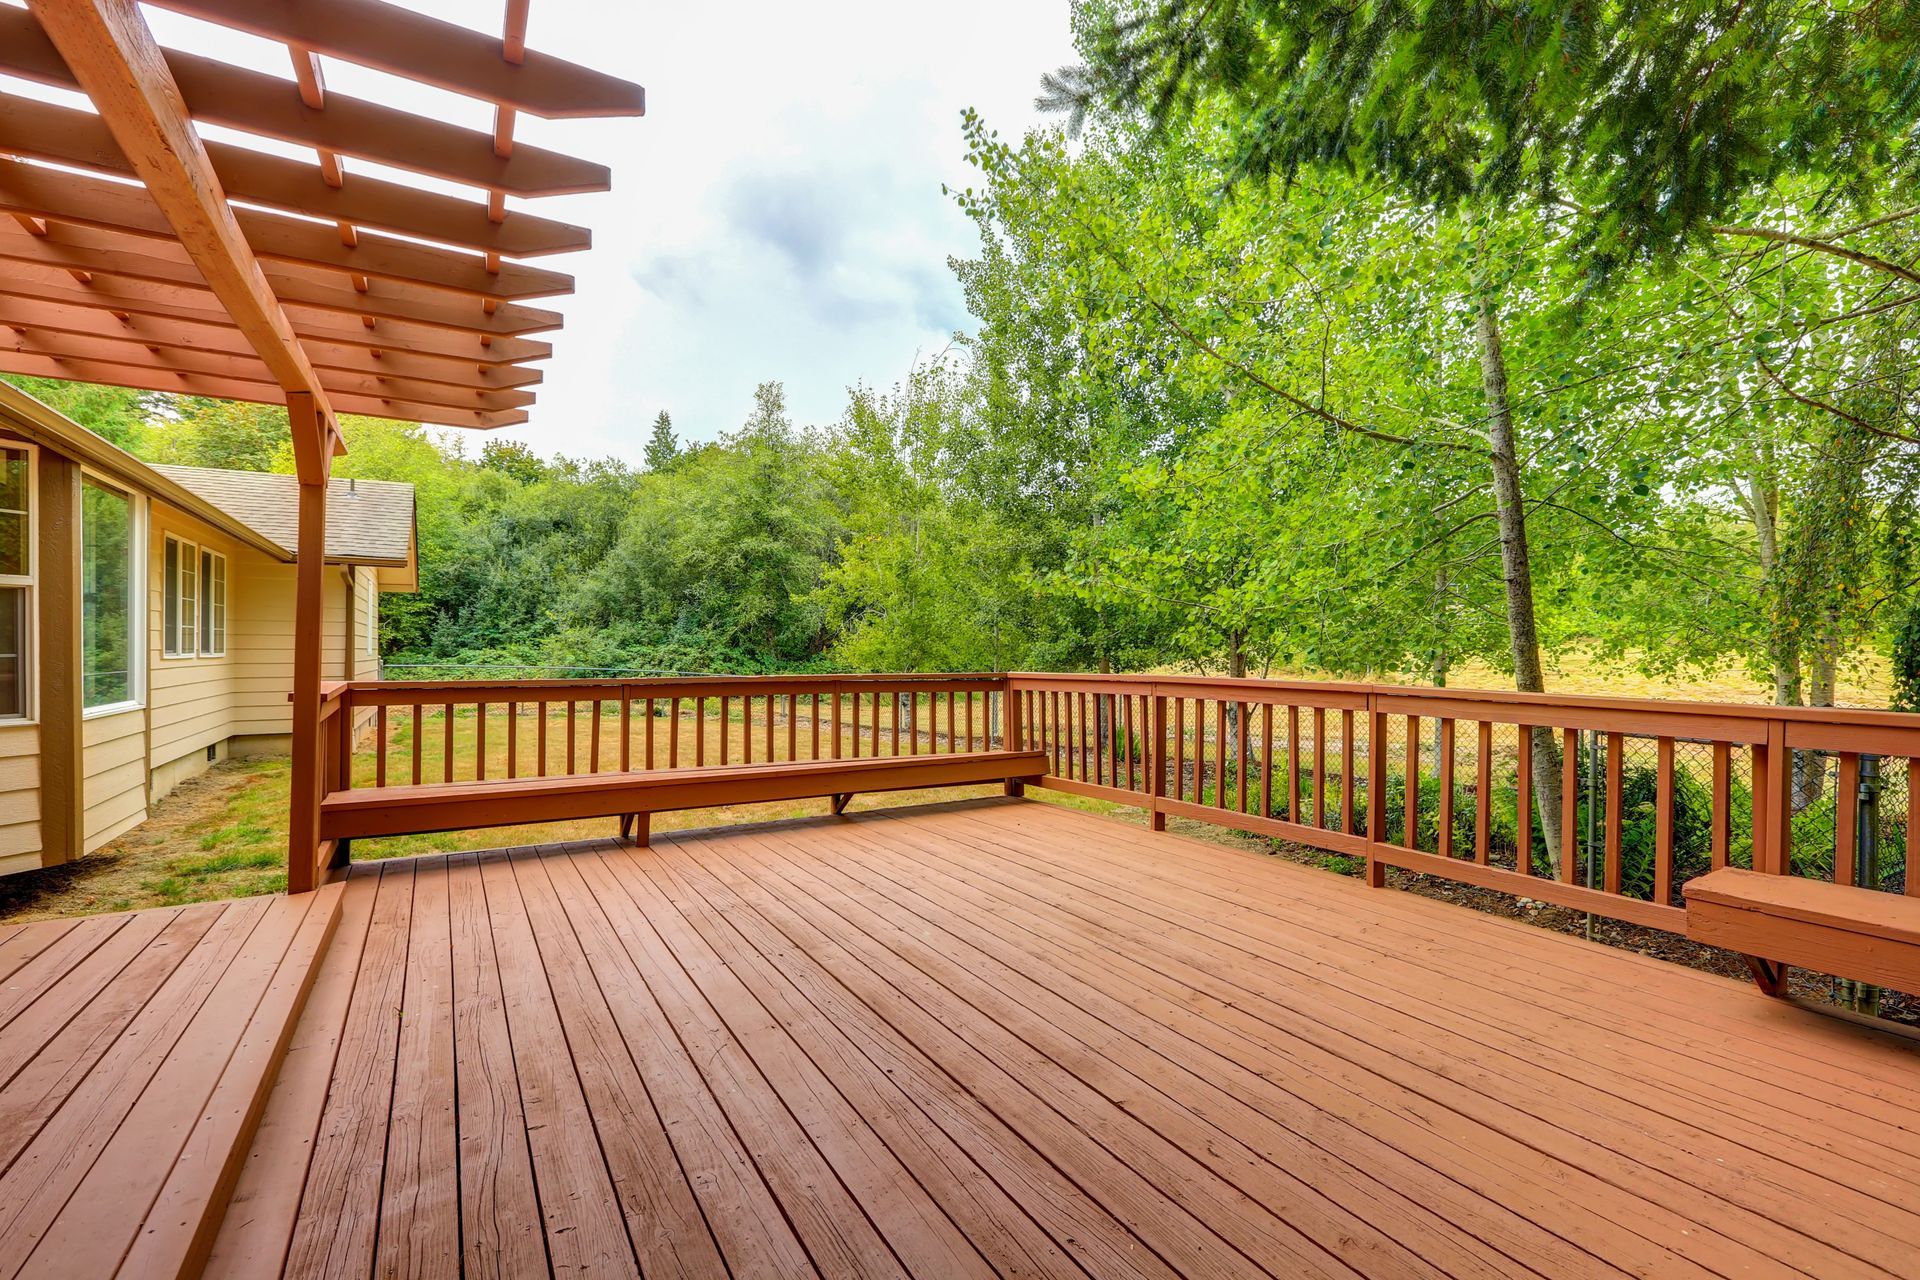 A large empty wooden deck with a pergola and trees in the background.